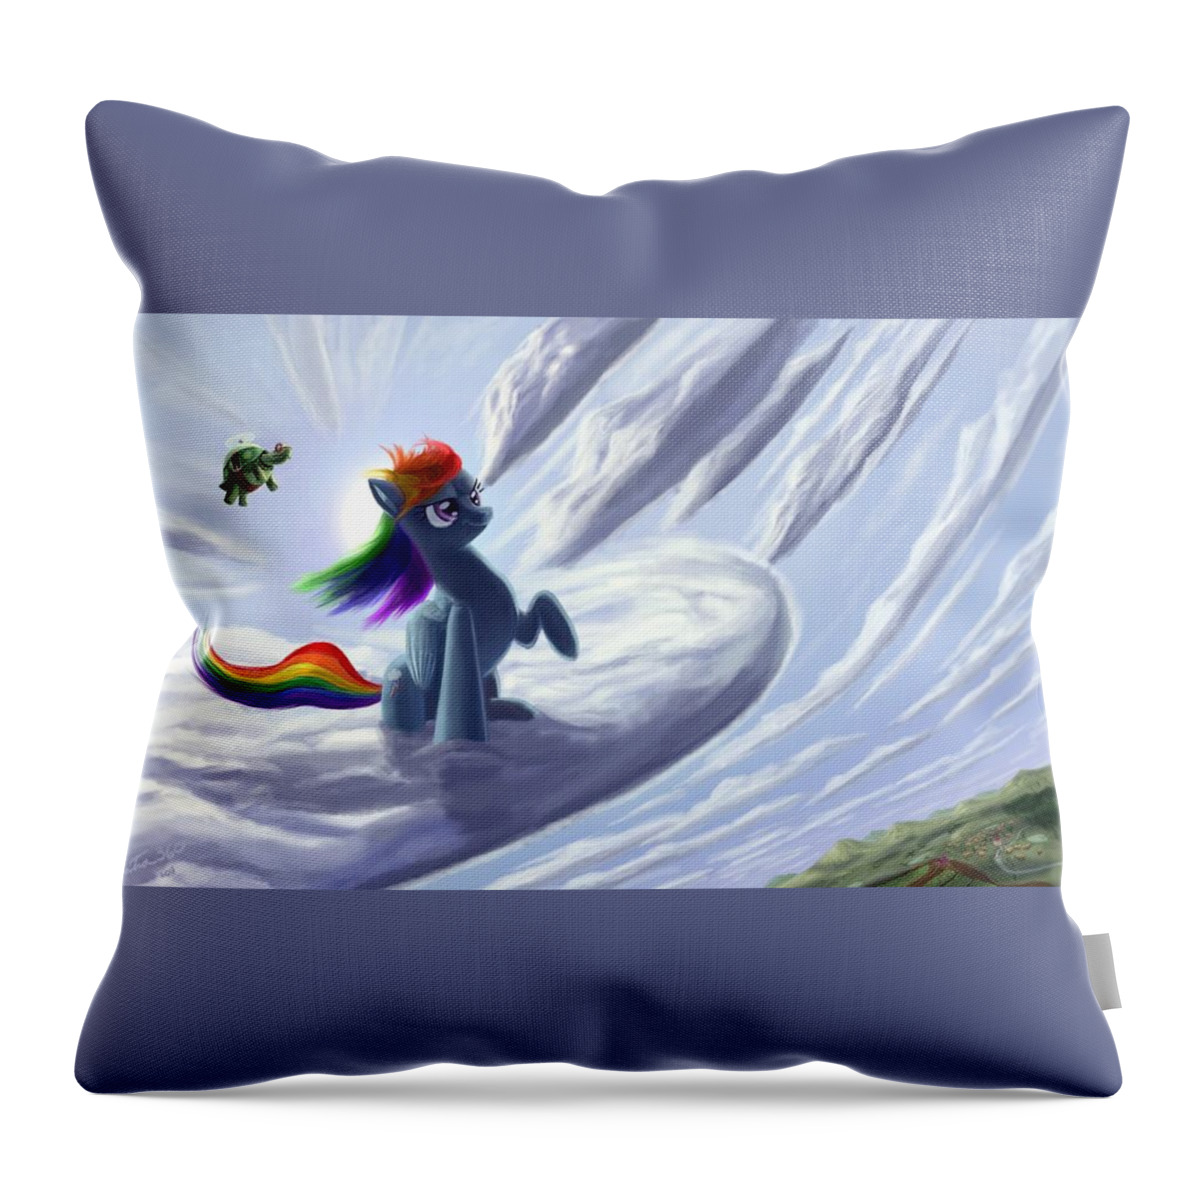 My Little Pony Friendship Is Magic Throw Pillow featuring the digital art My Little Pony Friendship is Magic #3 by Maye Loeser